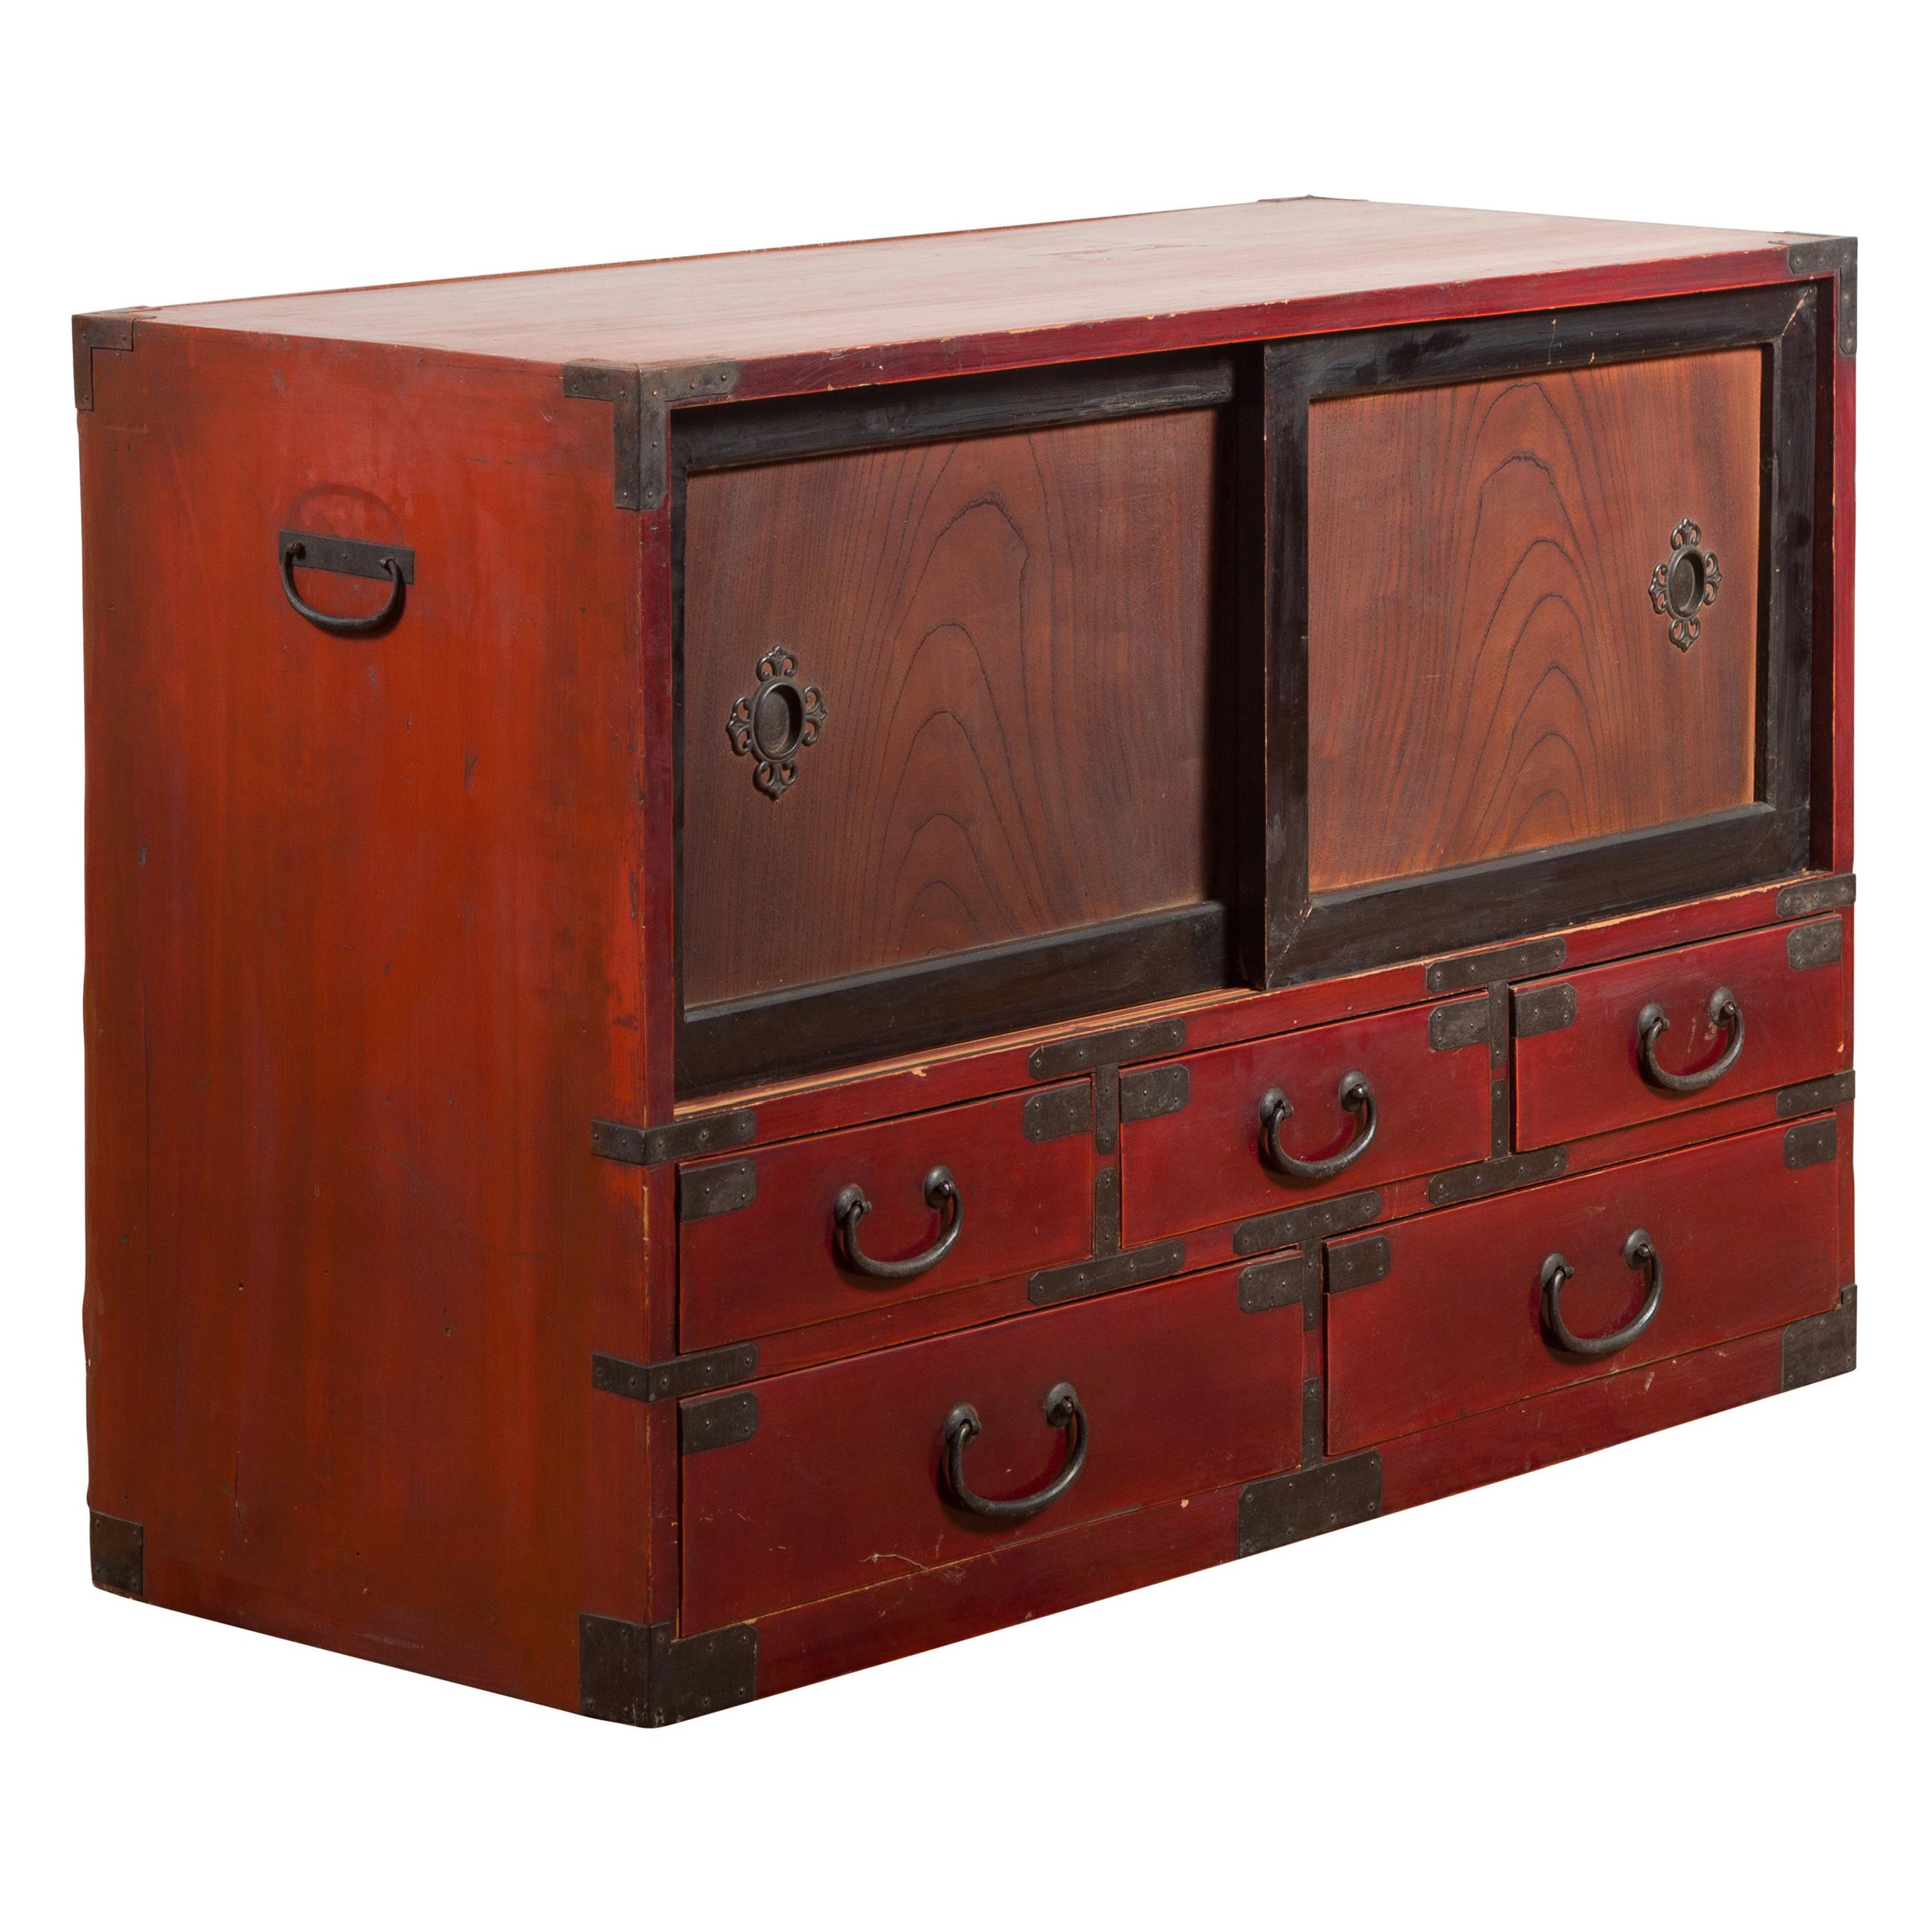 Japanese Early 20th Century Dark Red and Black Lacquered Tansu Cabinet